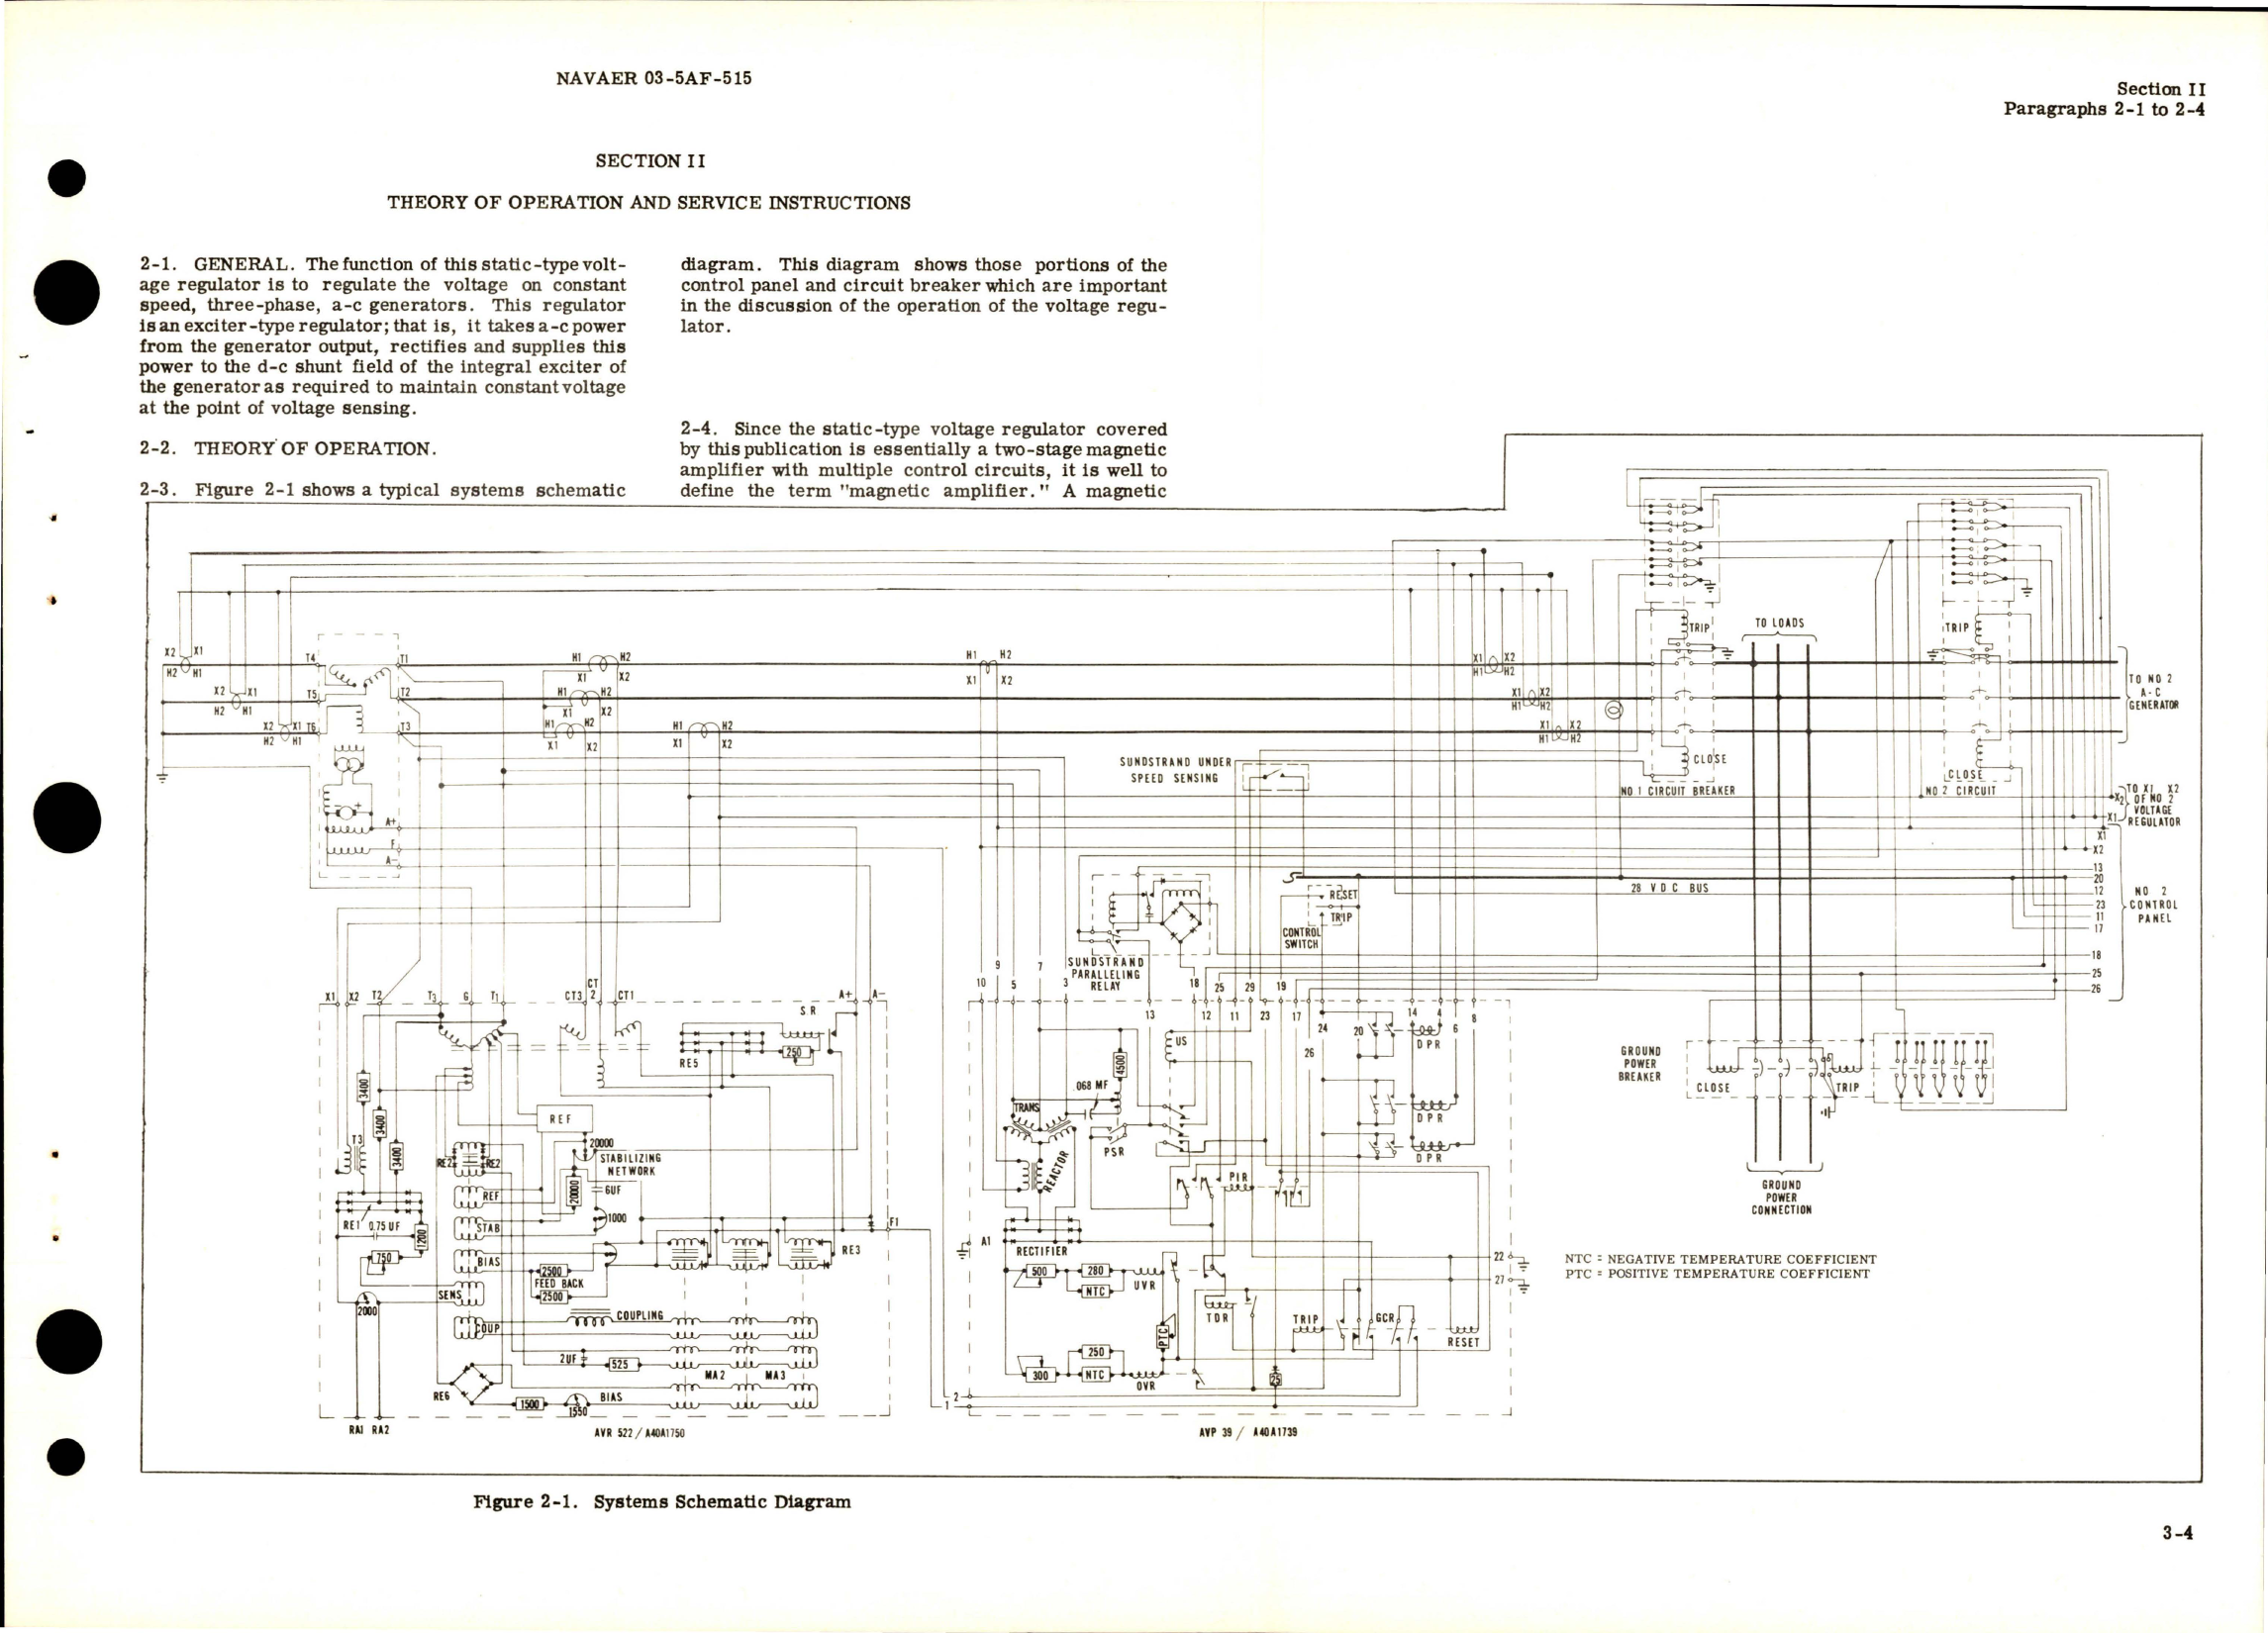 Sample page 7 from AirCorps Library document: Operation, Service and Overhaul Instructions for Voltage Regulator - Static Type - Part A40A1750